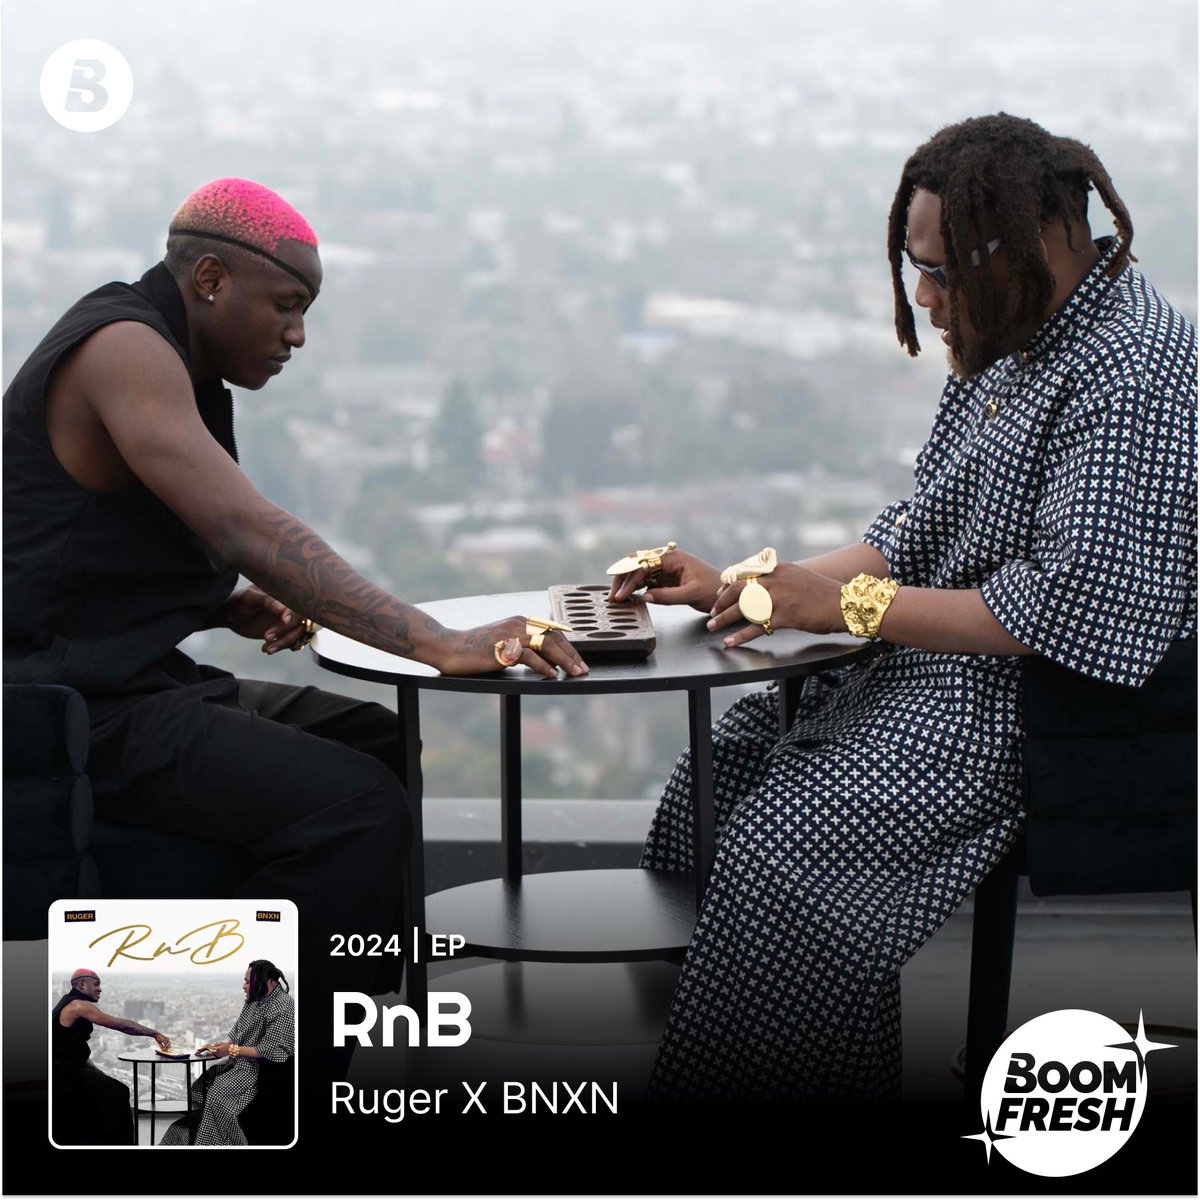 What a moment! 🤩We have been graced with this amazing body of work courtesy of @rugerofficial & @BNXN! 🔥 #RnB is now ours! ✈️ Stream on Boomplay! ➡️ boom.lnk.to/rnb #BoomFresh #HomeOfMusic